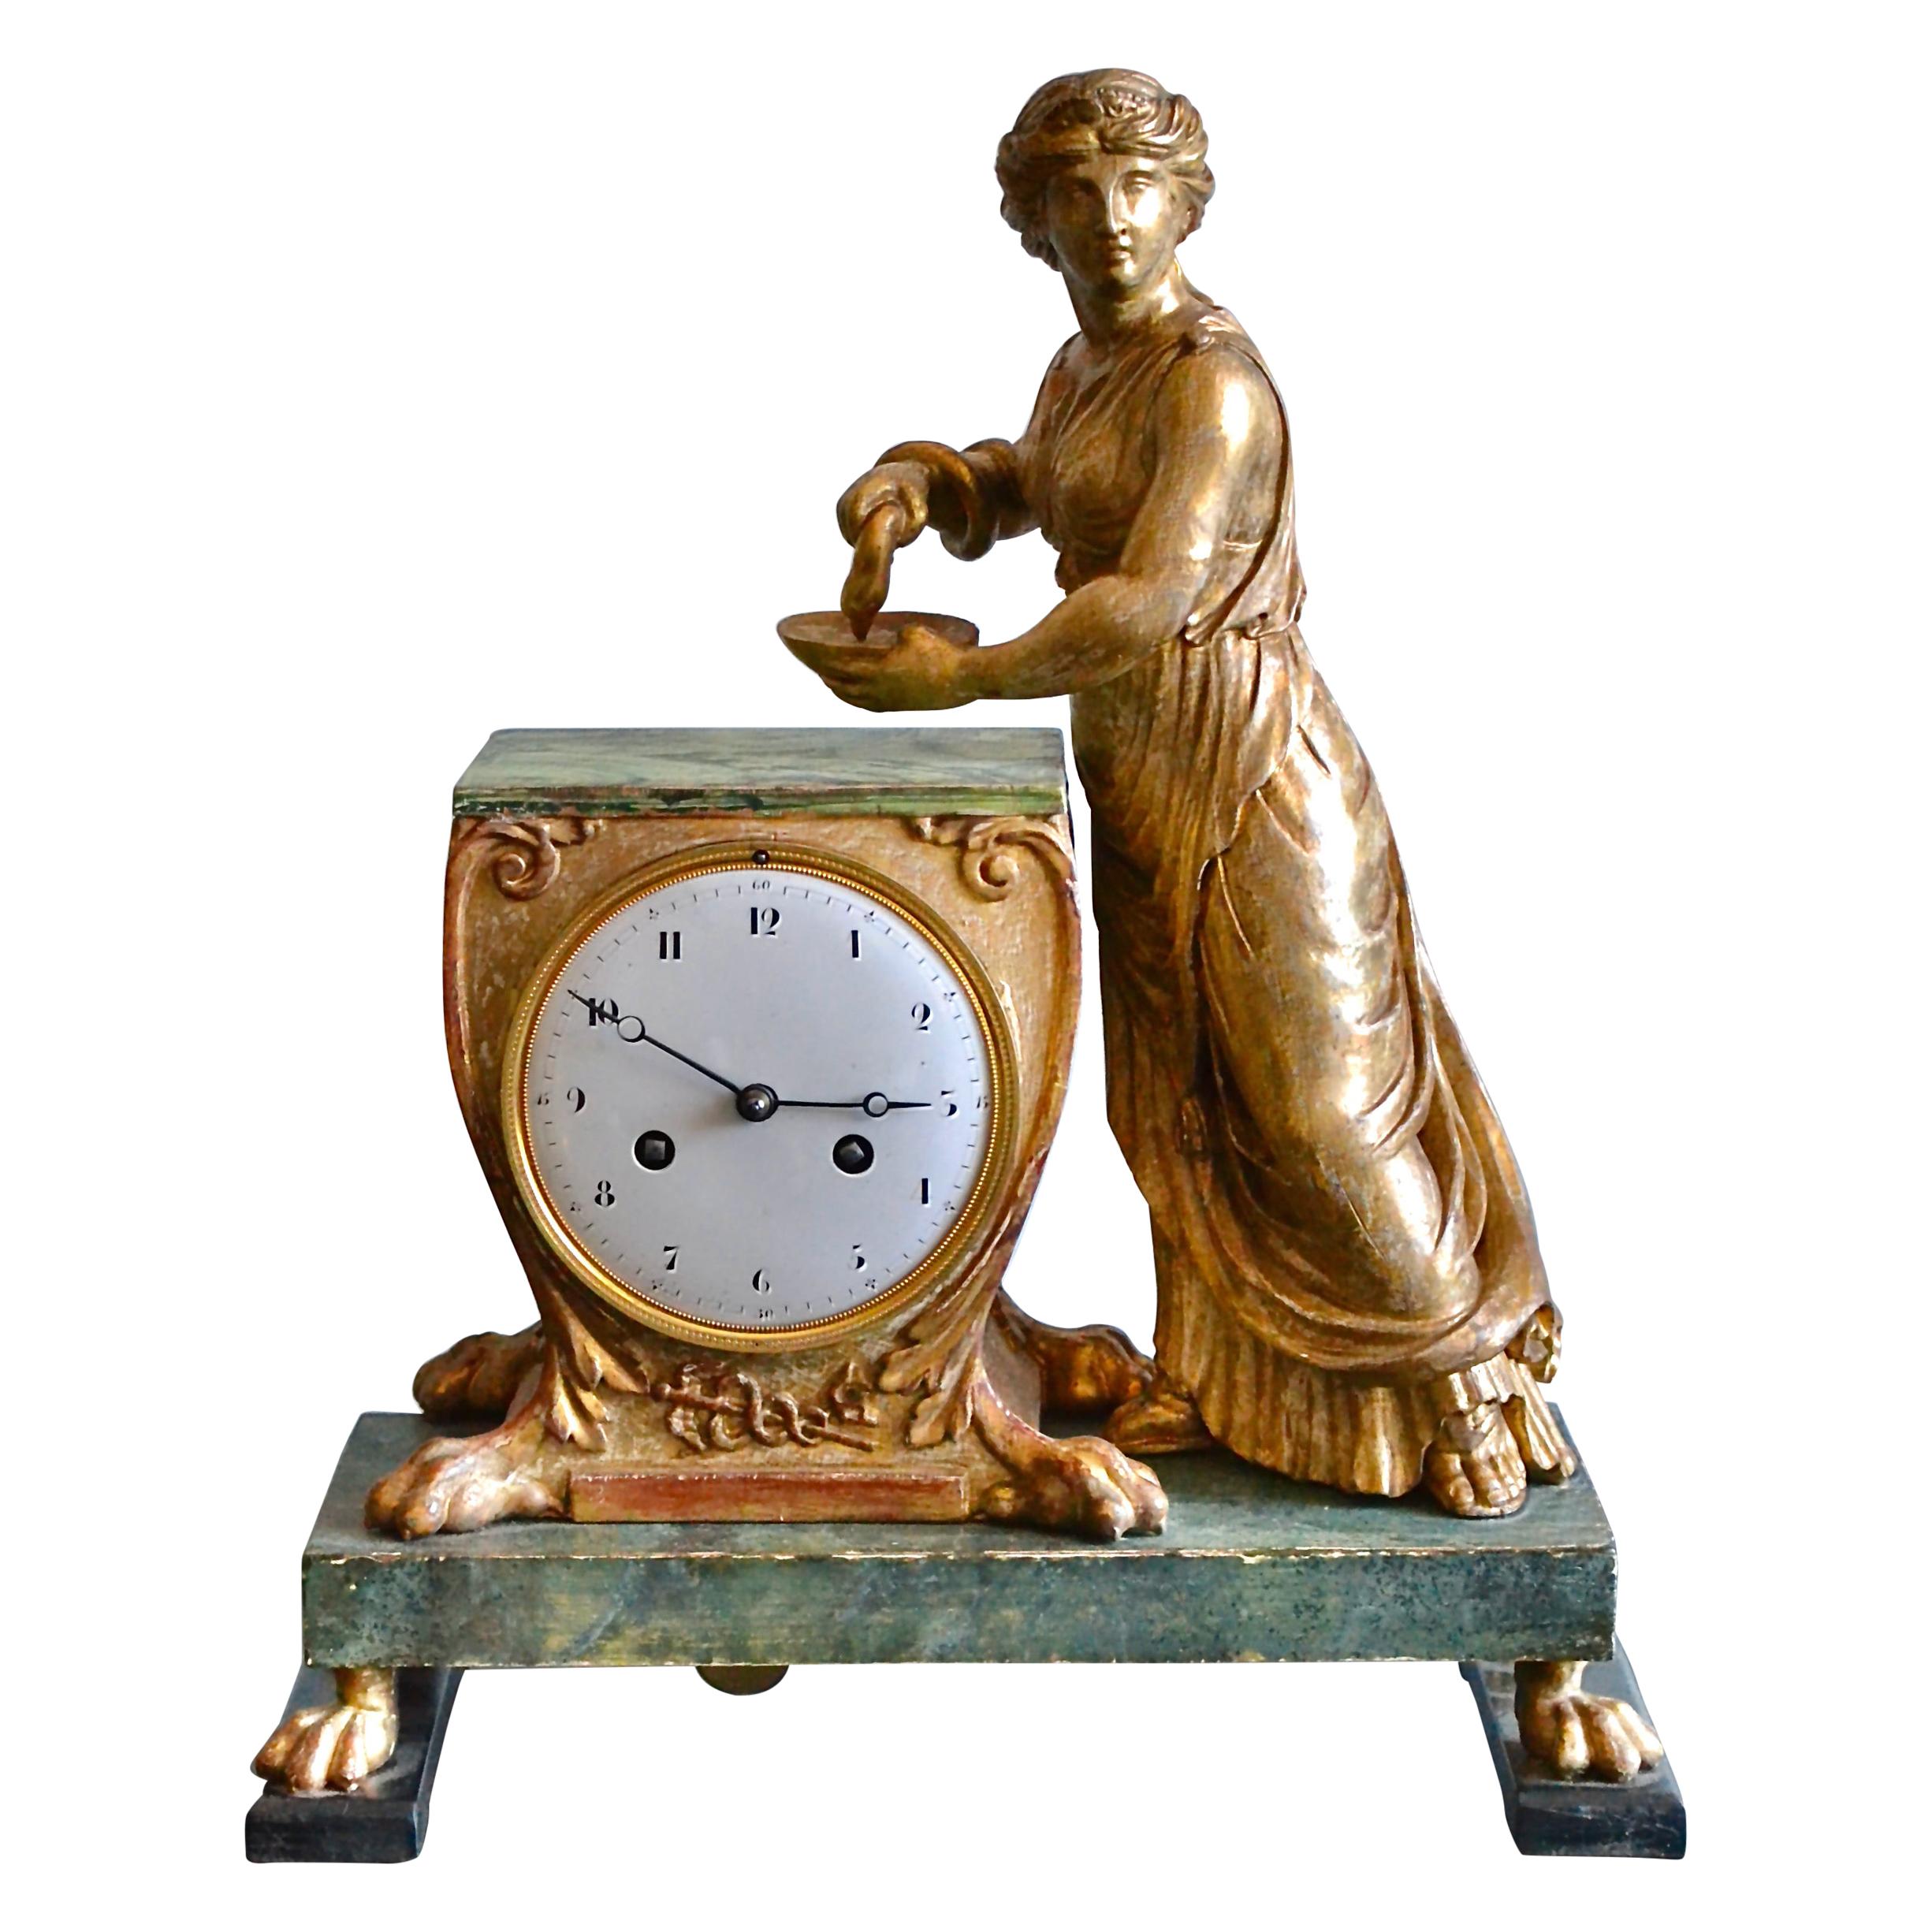 A Russian Empire Carved Gilt Wood and Faux Malachite Painted Mantel Clock